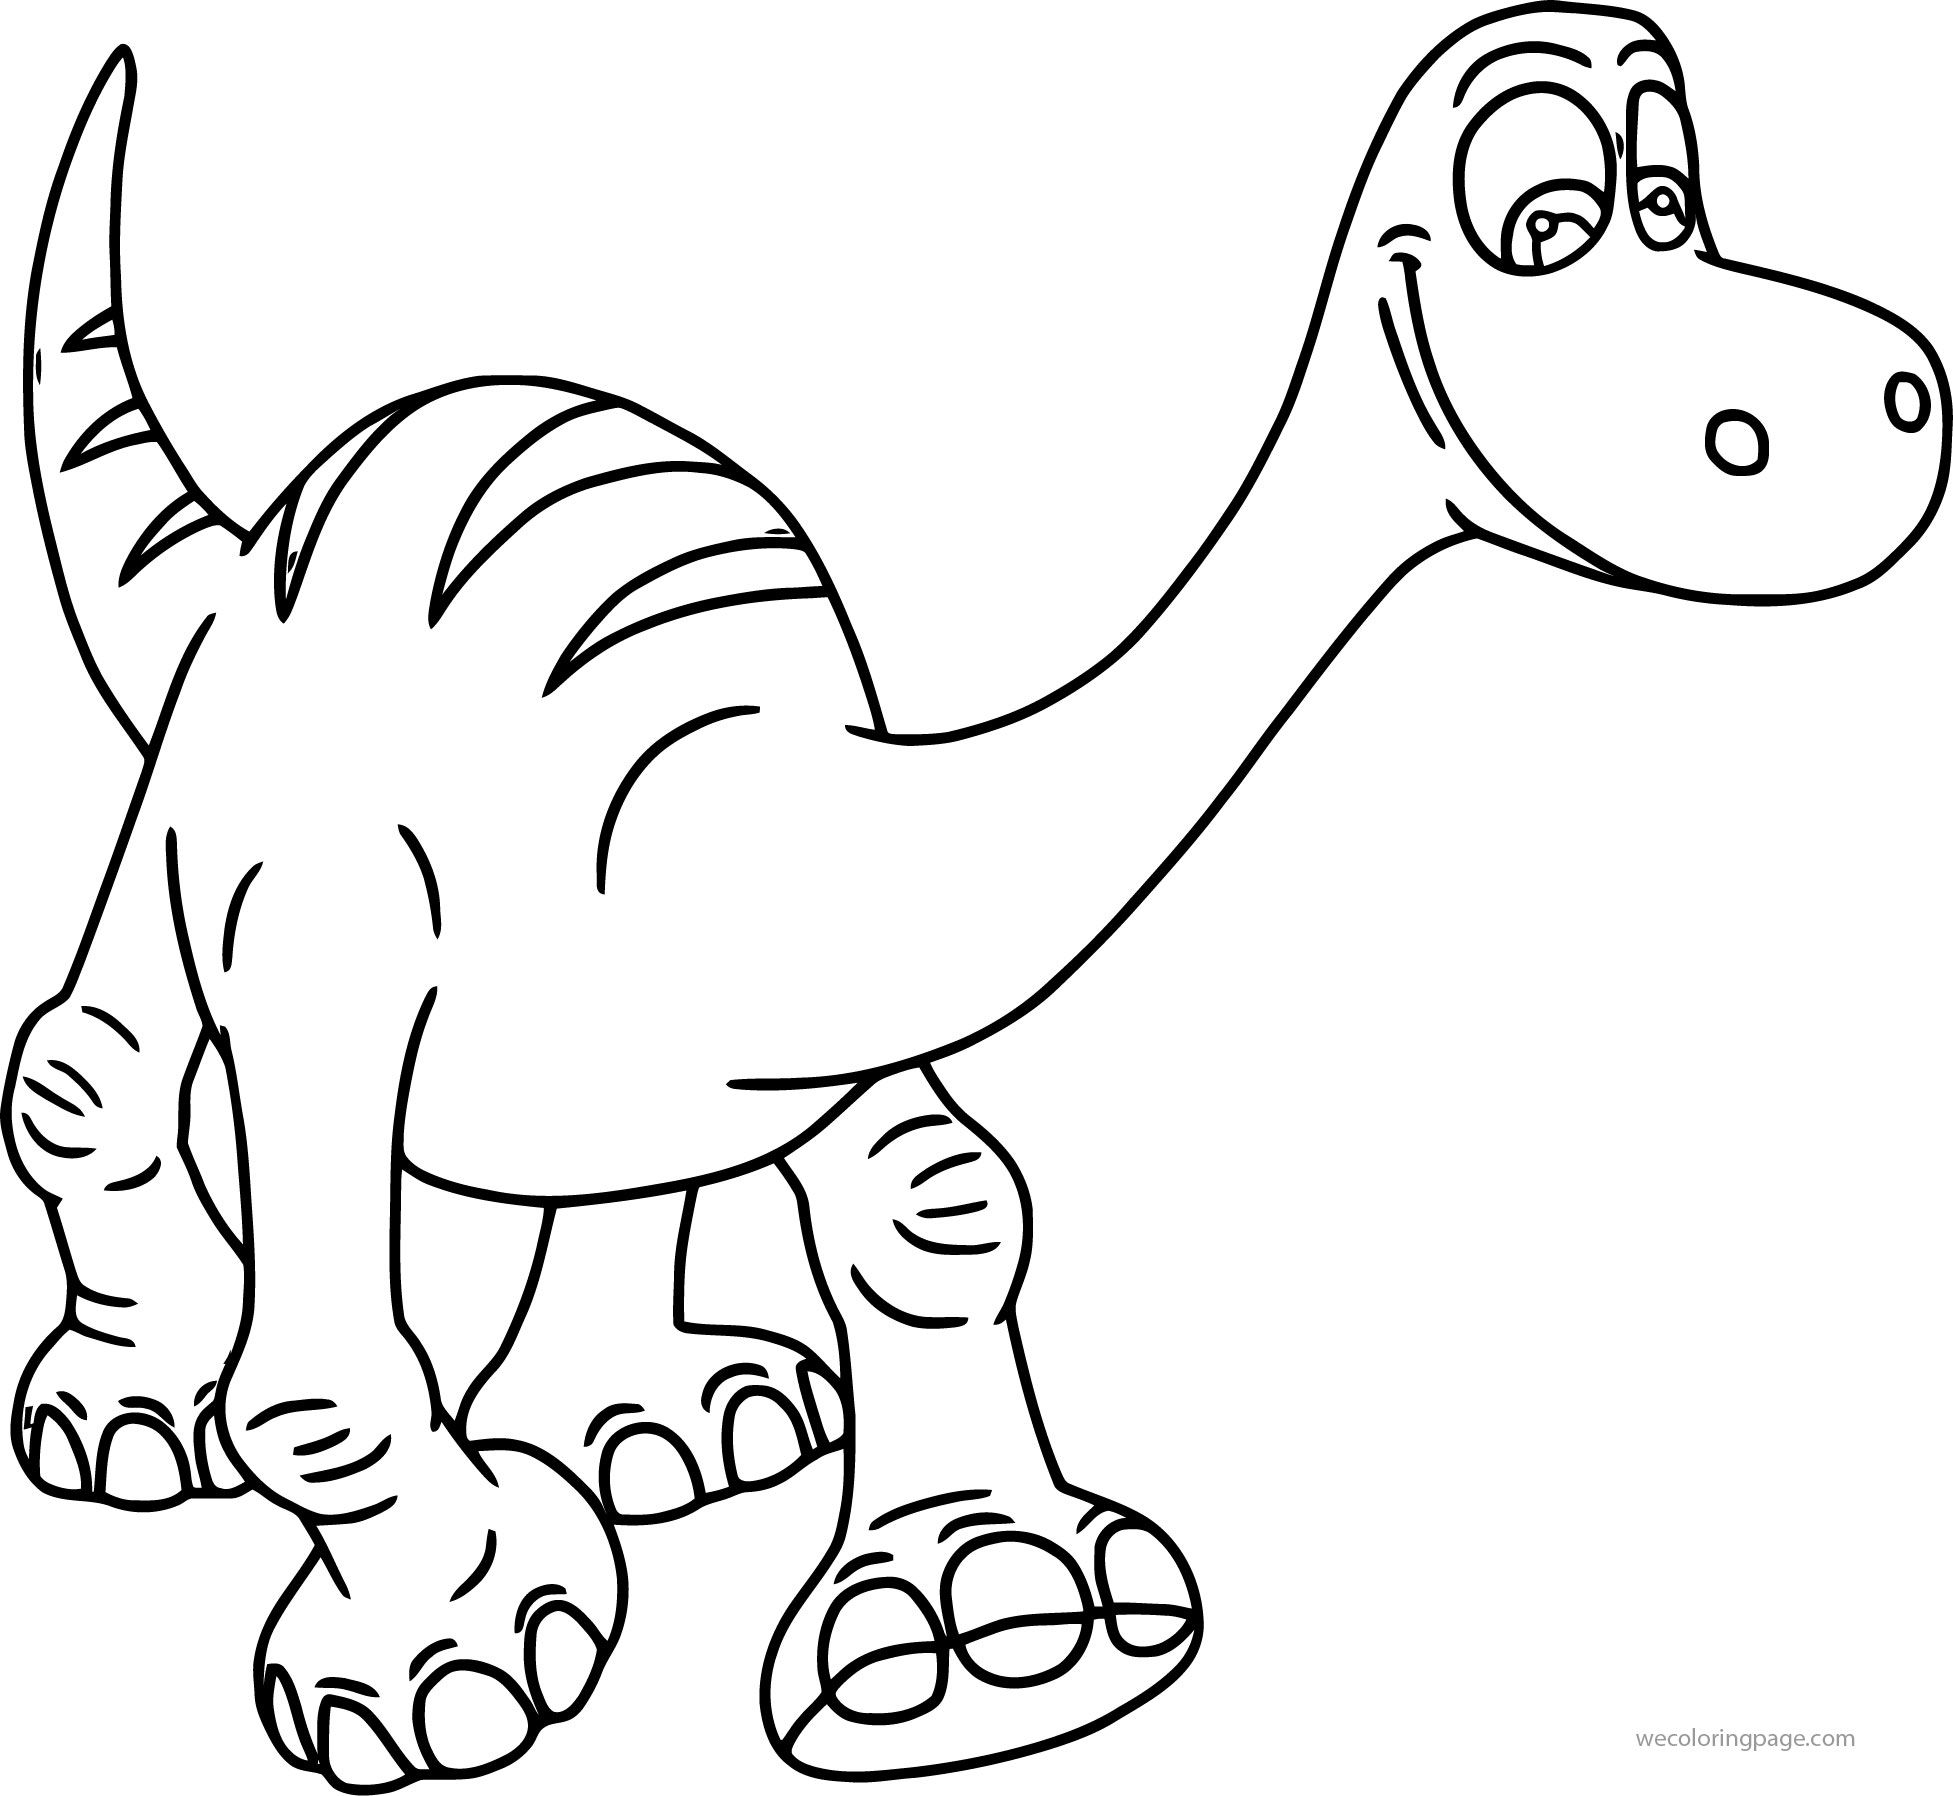 dinosaurs-2-coloring-pages-coloring-home